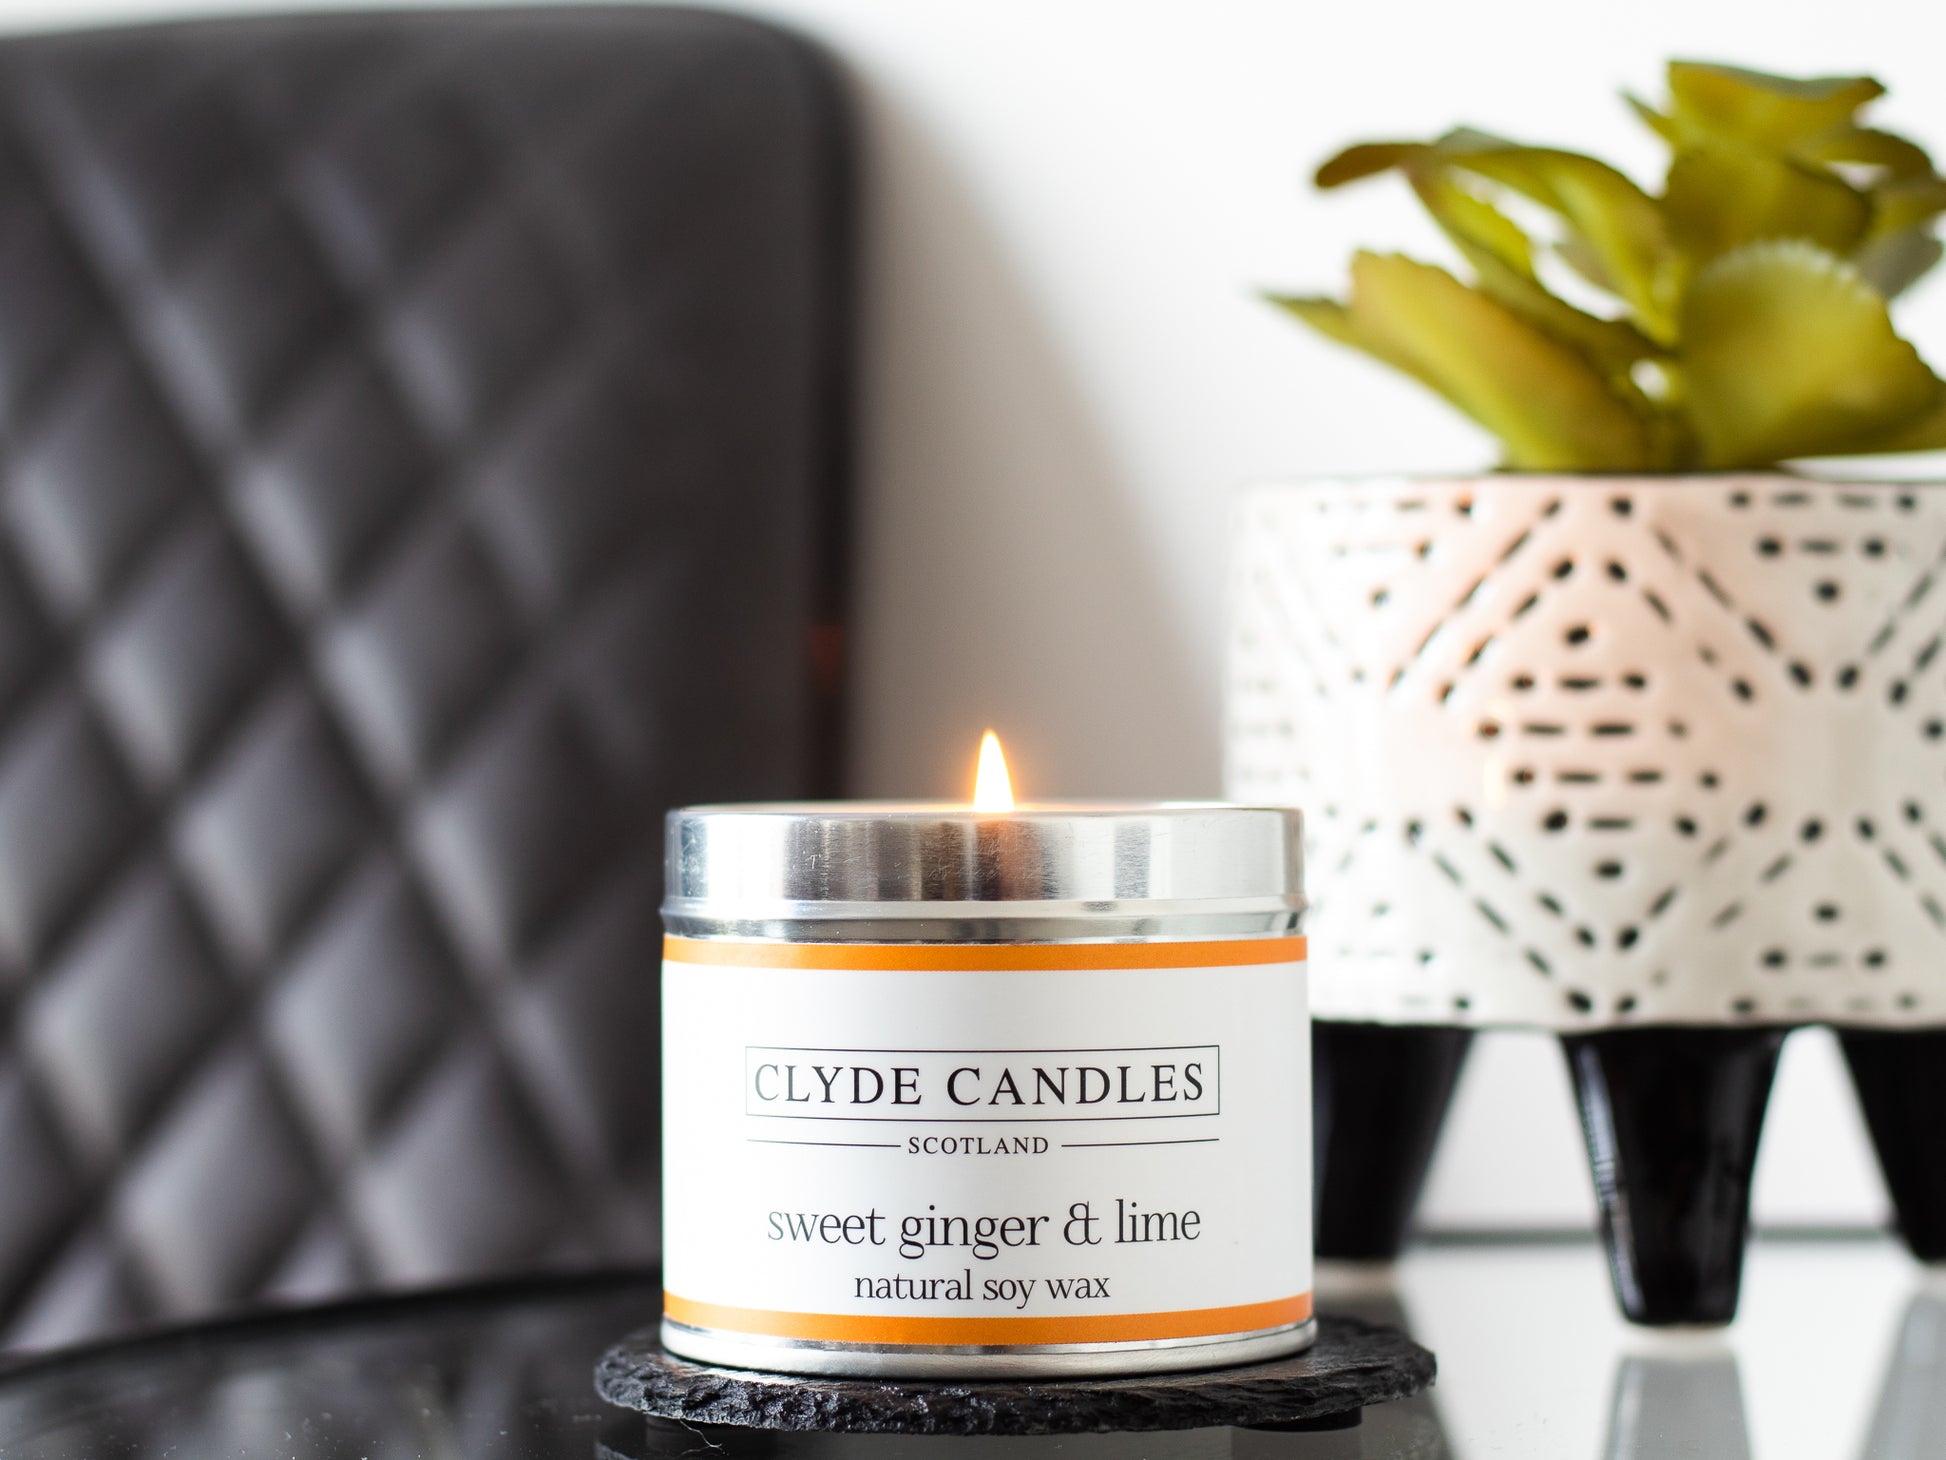 Sweet Ginger & Lime Scented Candle Tin, Natural Soy wax, Scottish Candles, Clyde Candles